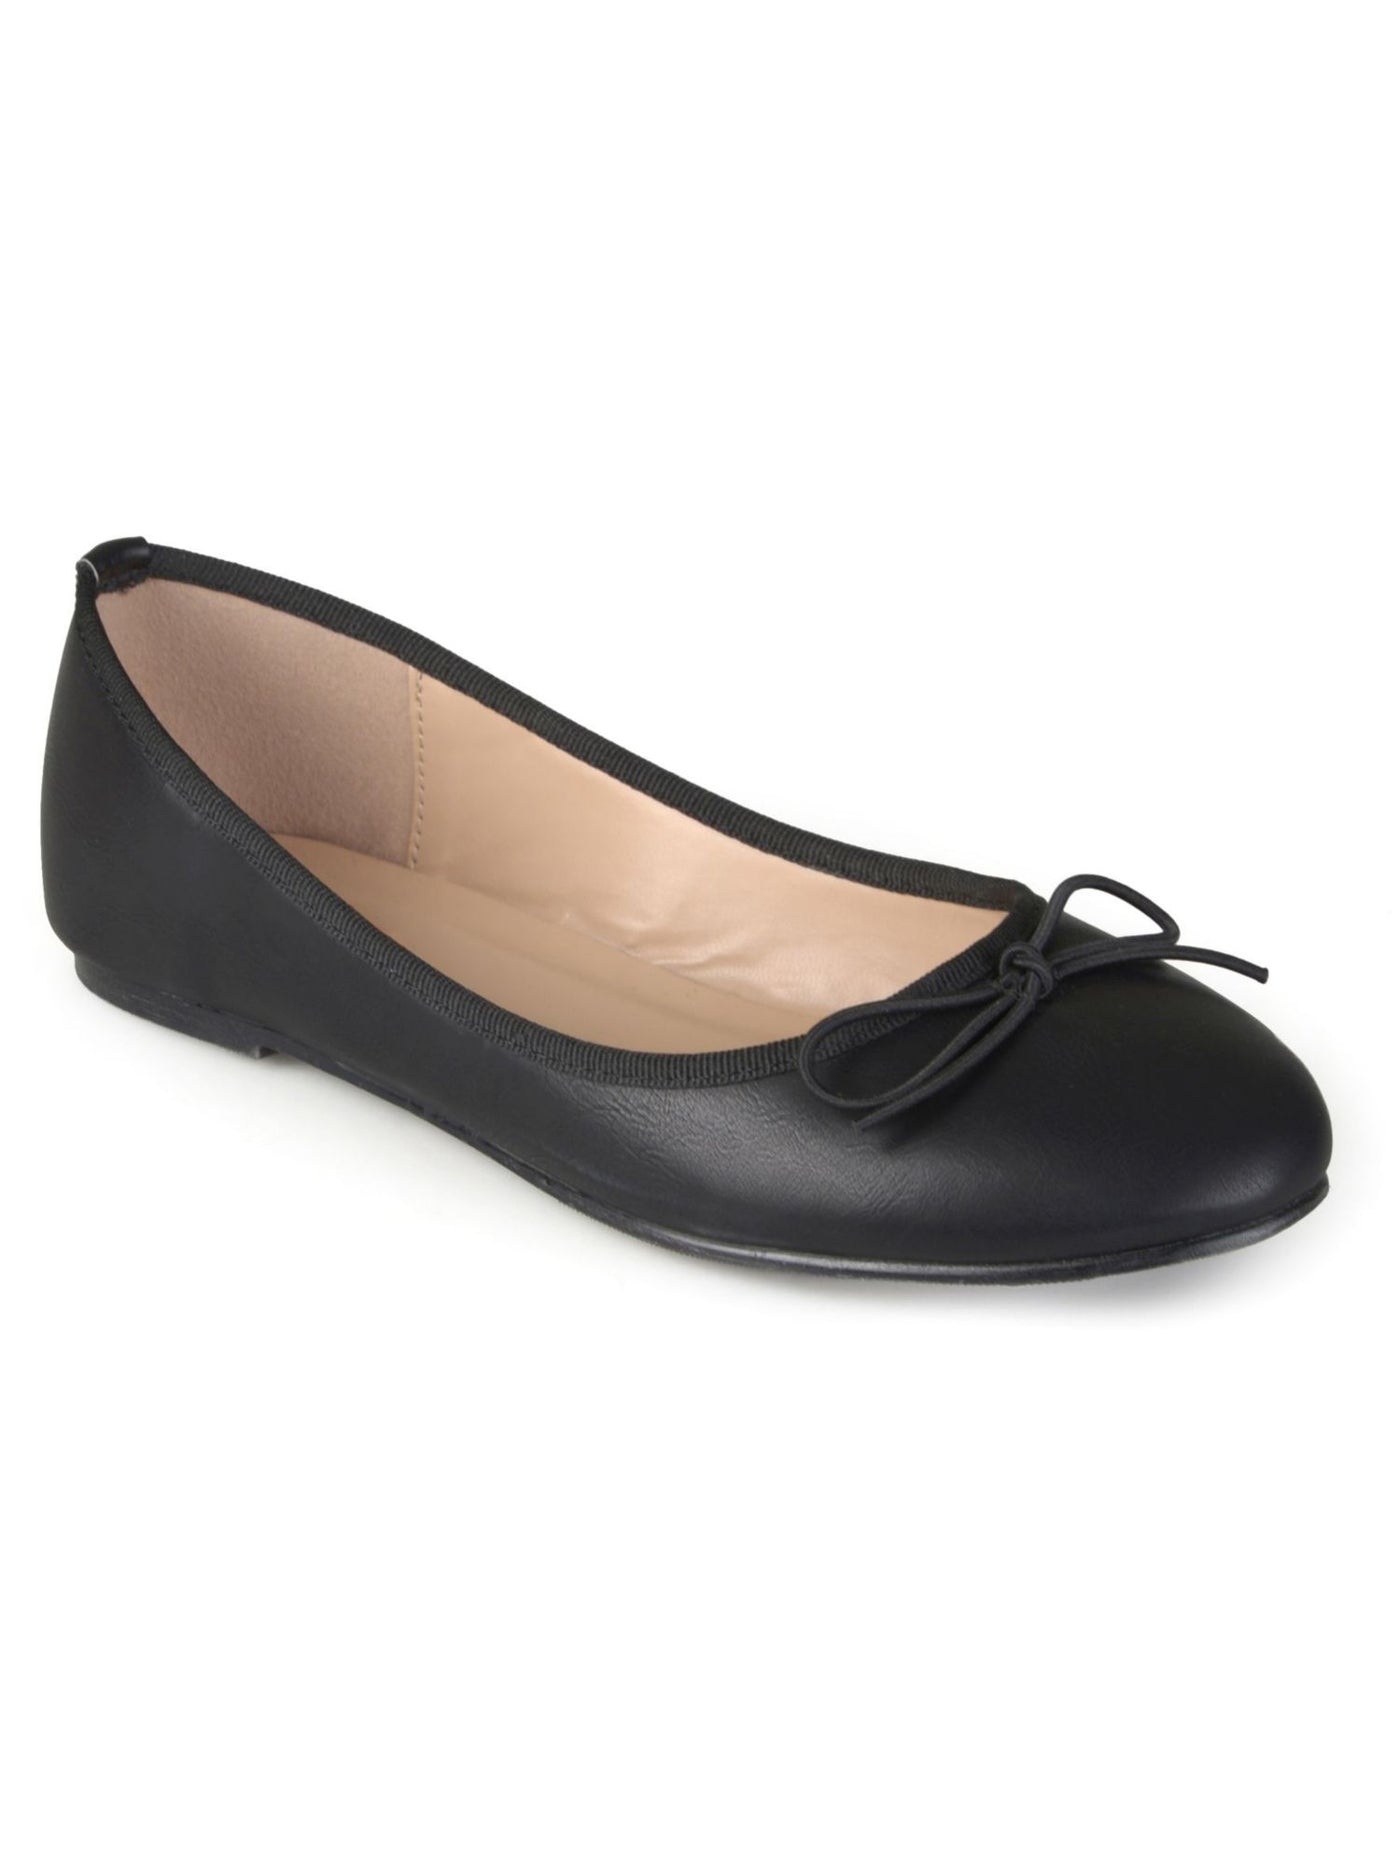 JOURNEE COLLECTION Womens Black Bow Accent Padded Vika Round Toe Slip On Ballet Flats 9